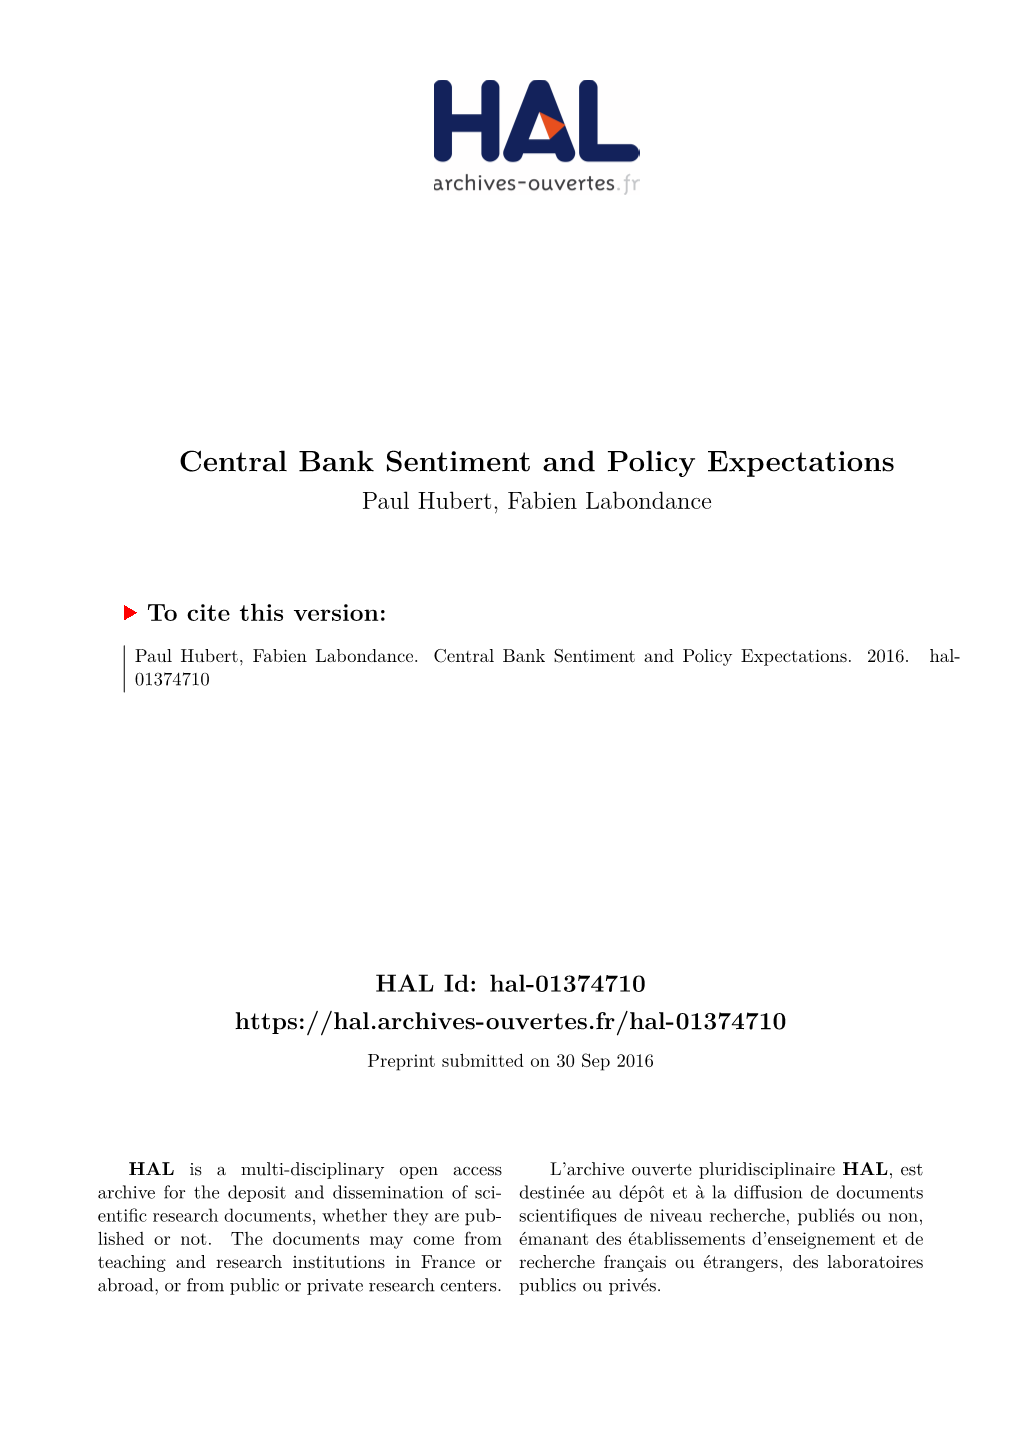 Central Bank Sentiment and Policy Expectations Paul Hubert, Fabien Labondance